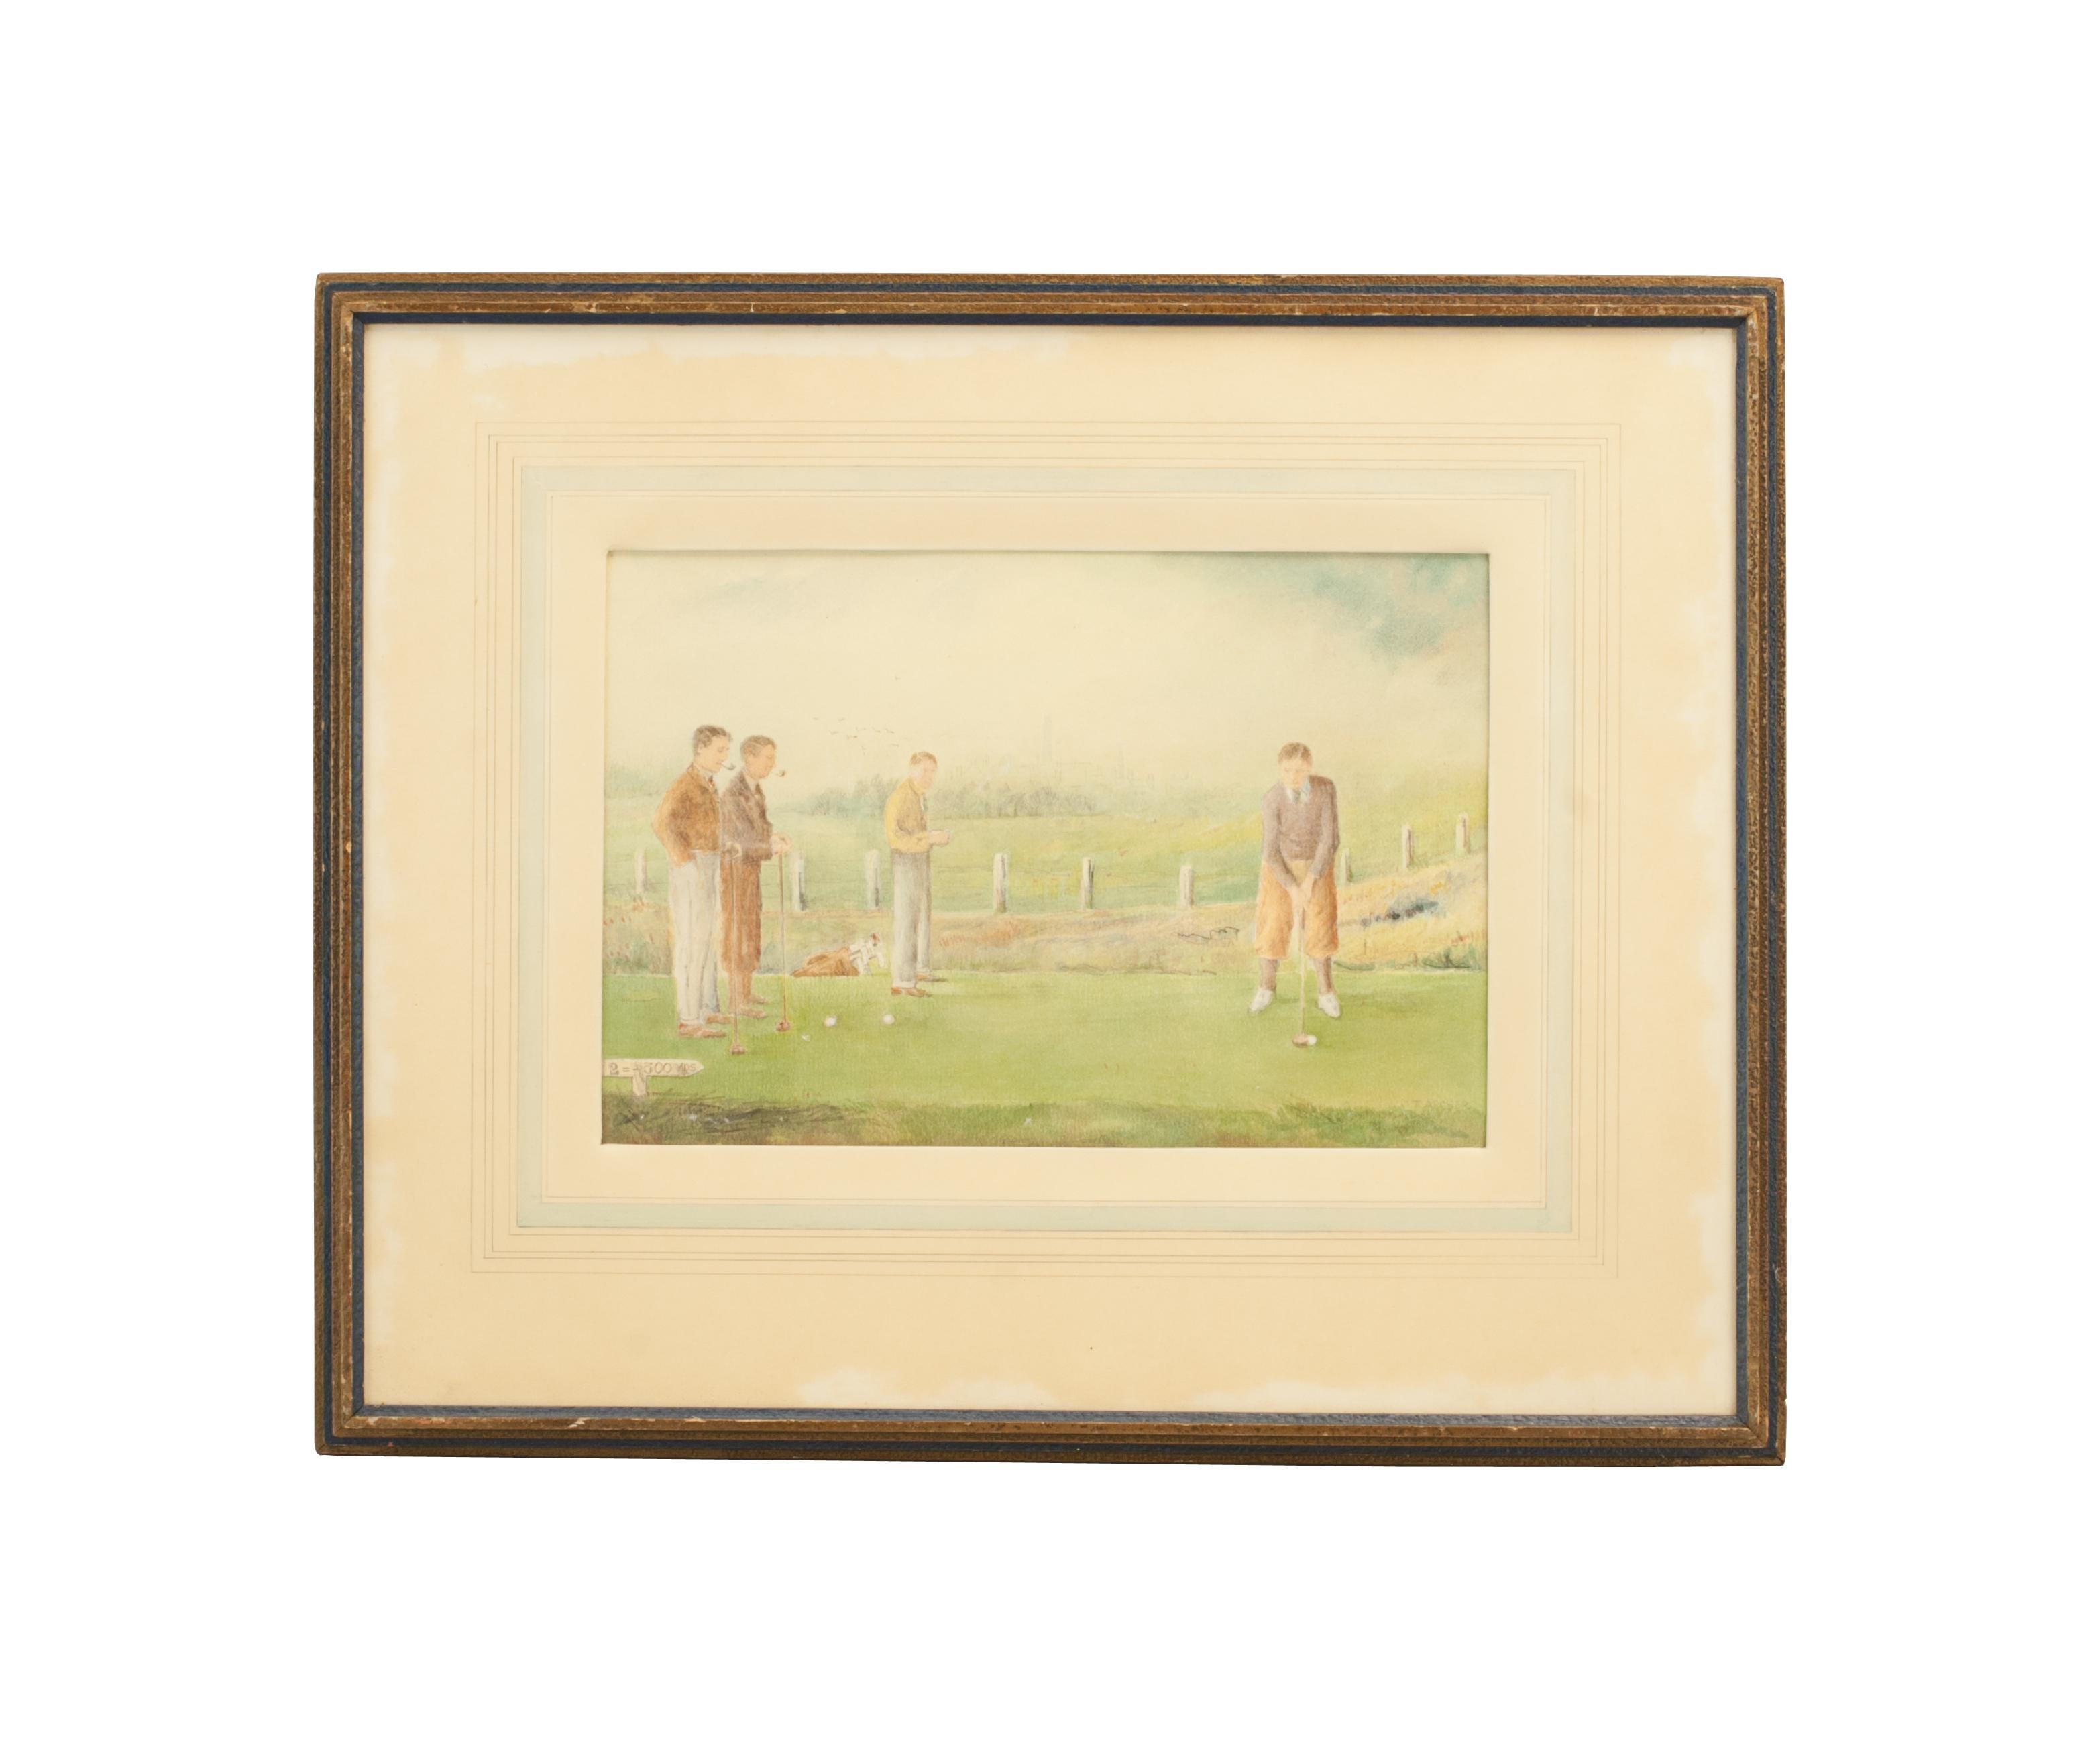 Bilston Golf Club Watercolour, H.E. Lewis Driving.
A charming golf watercolour of H. Lewis (the club professional at Bilston Golf Club) driving from the second tee. Lewis is watched by his three playing companions on his way to the course record for